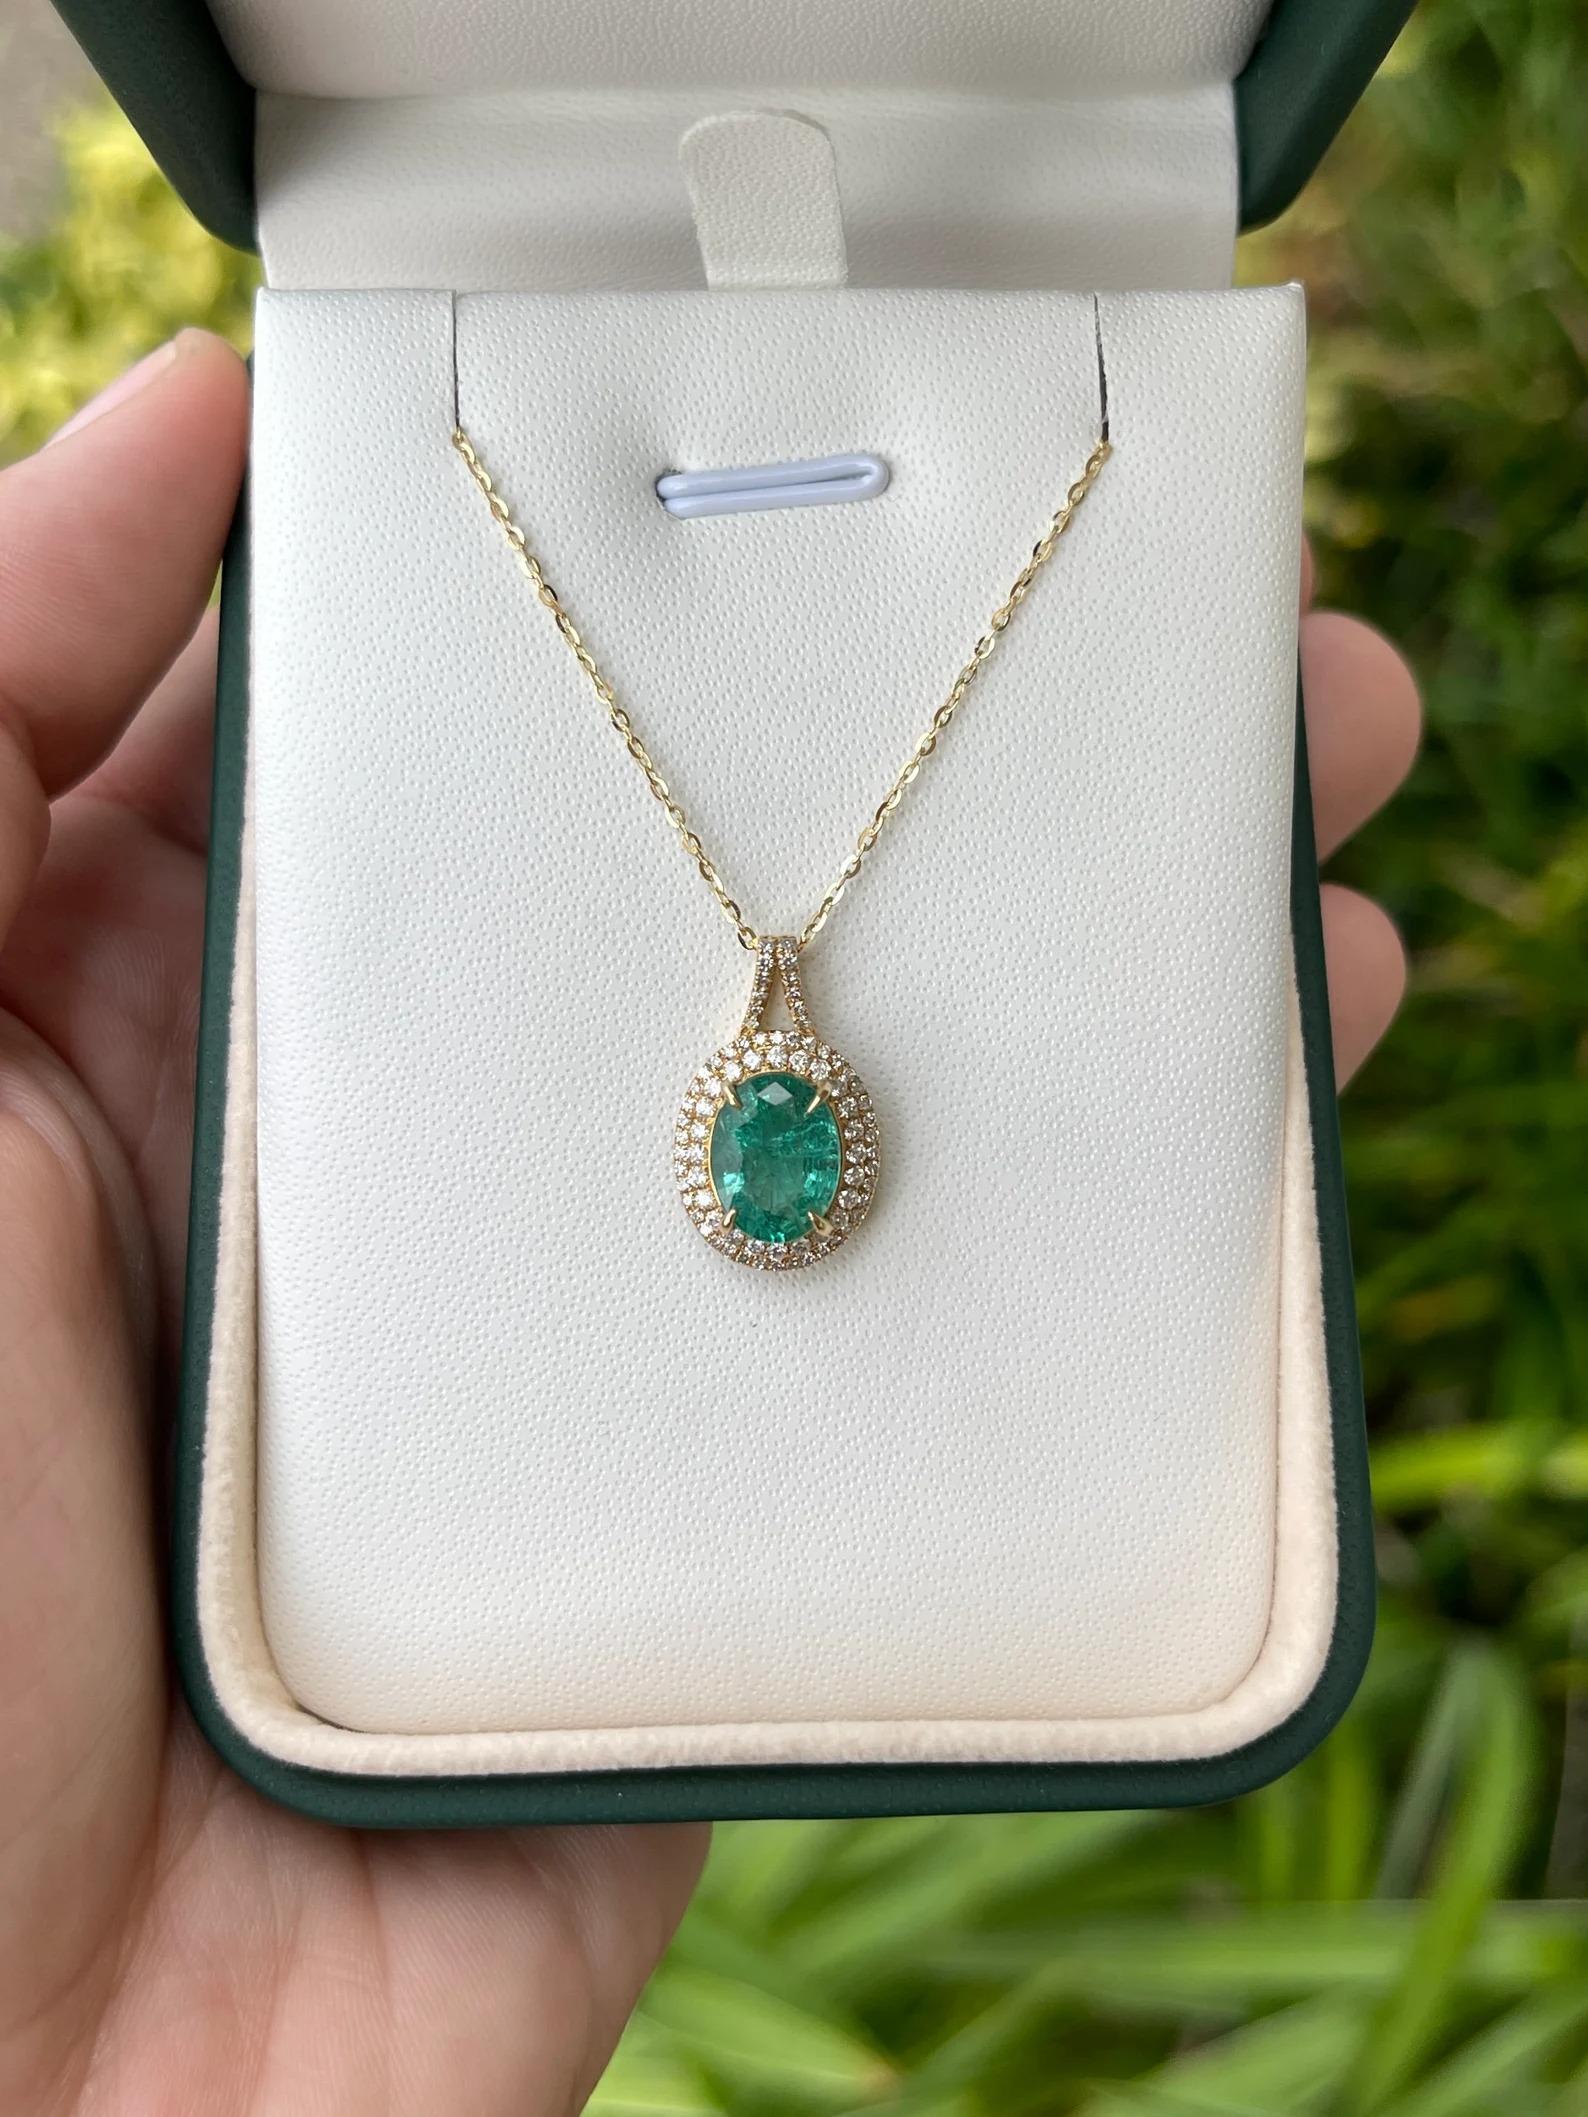 A stunning emerald and diamond pendant. This lovely piece showcases a 2.19-carat, natural Zambian emerald with a gorgeous medium bluish-green color, and great characteristics. Securely prong-set, in claws; surrounding this gem is a double halo of